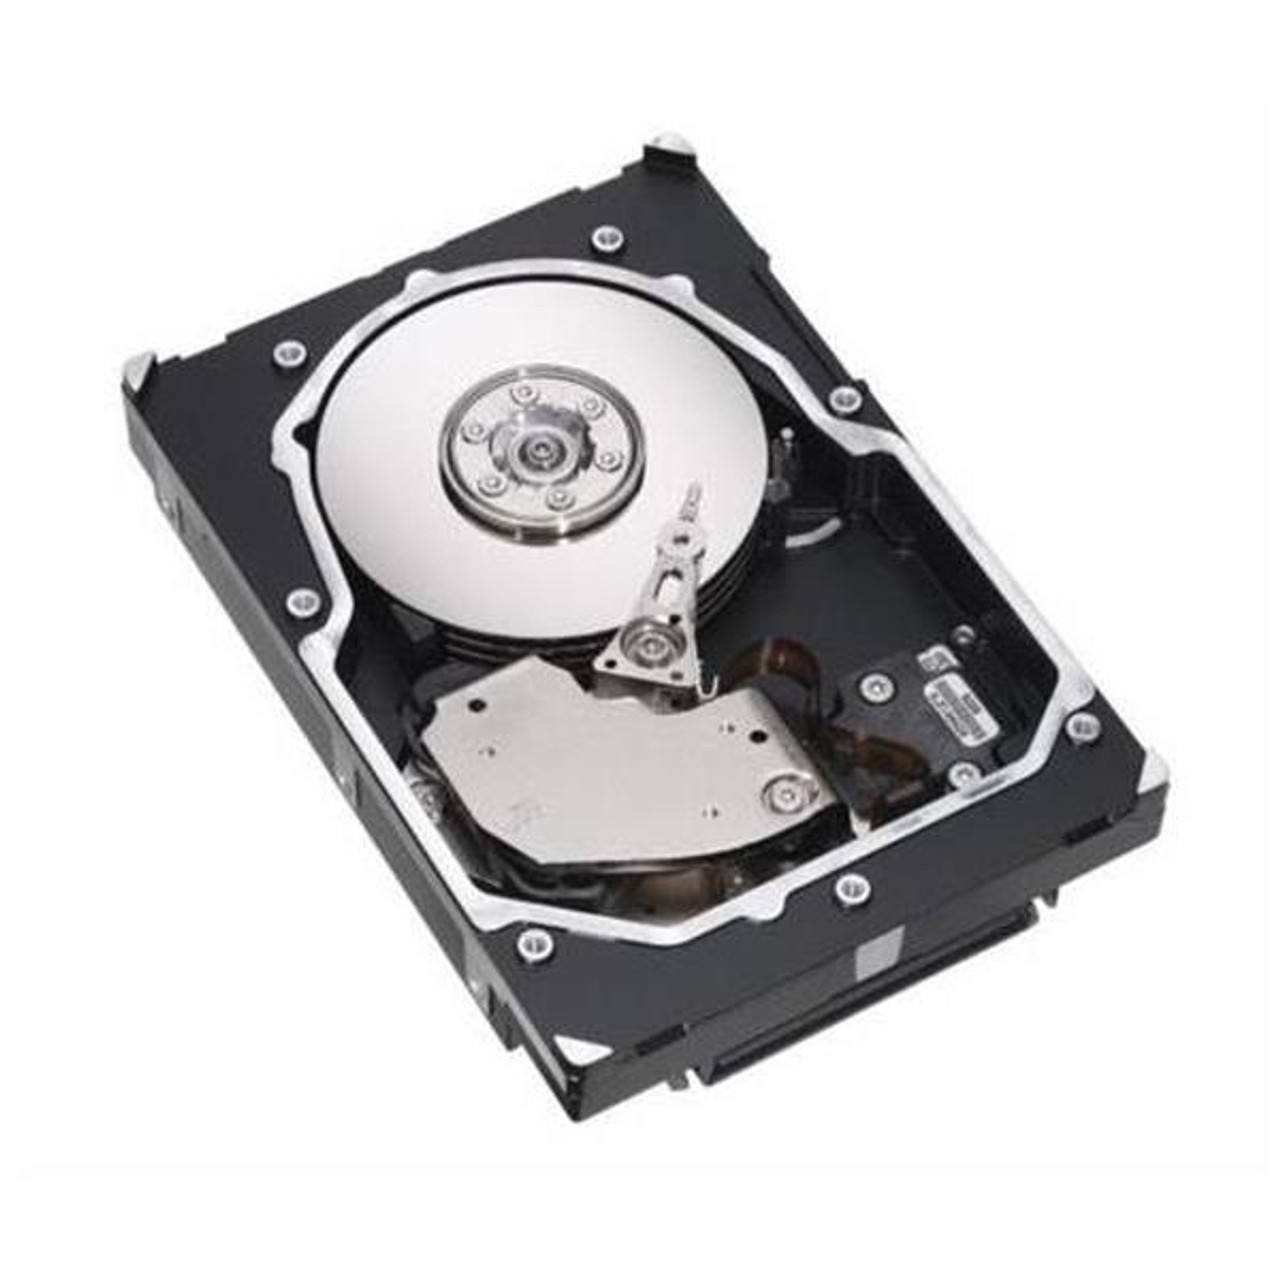 DISK-7315-AS3S3 Adaptec 73GB 15000RPM Ultra-320 SCSI 80-Pin 8MB Cache 3.5-inch Internal Hard Drive